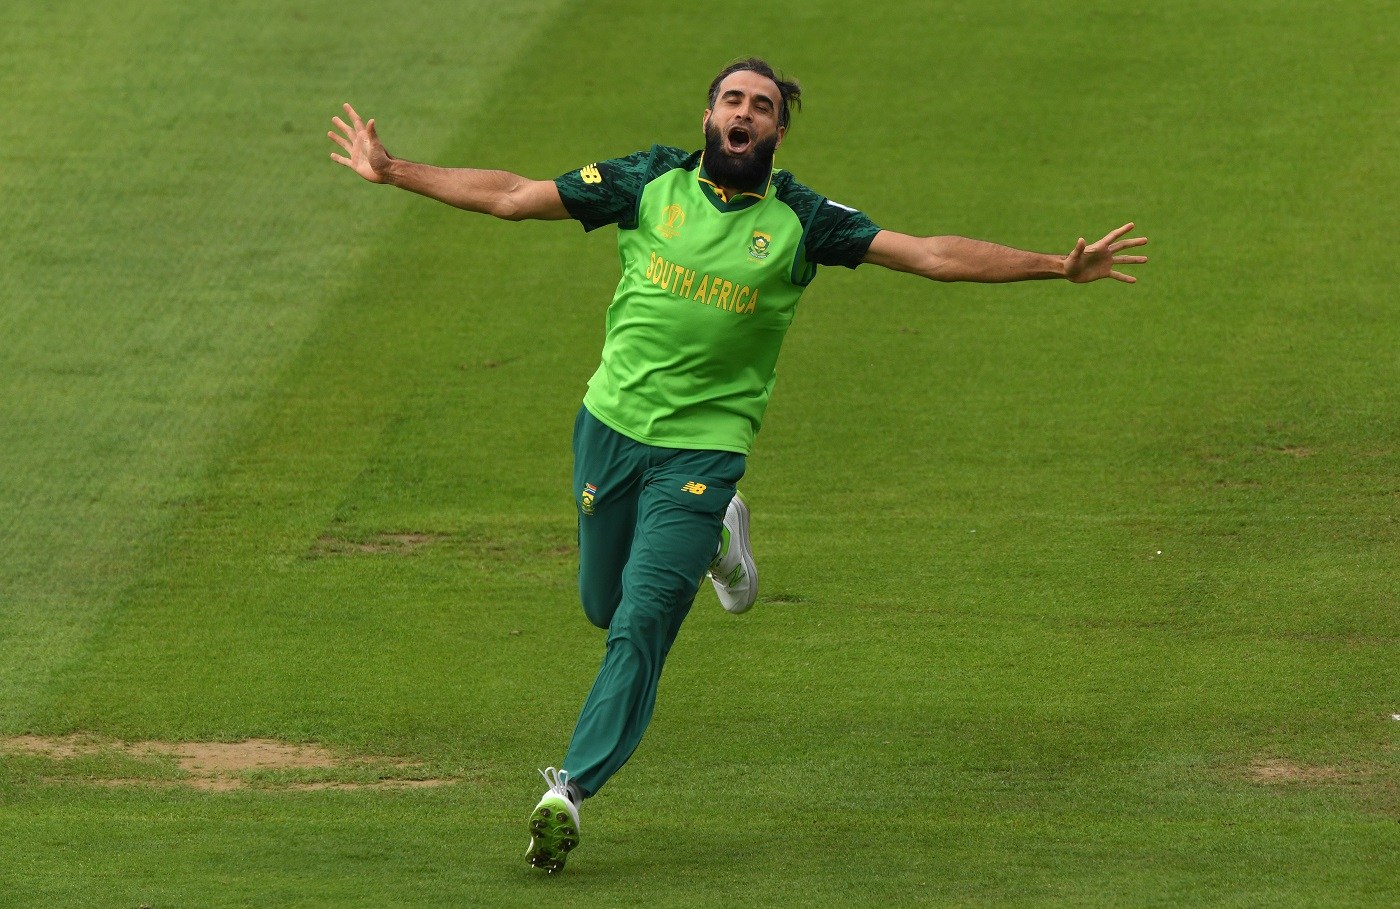 Imran Tahir Becomes the highest Wicket-Taker for SA